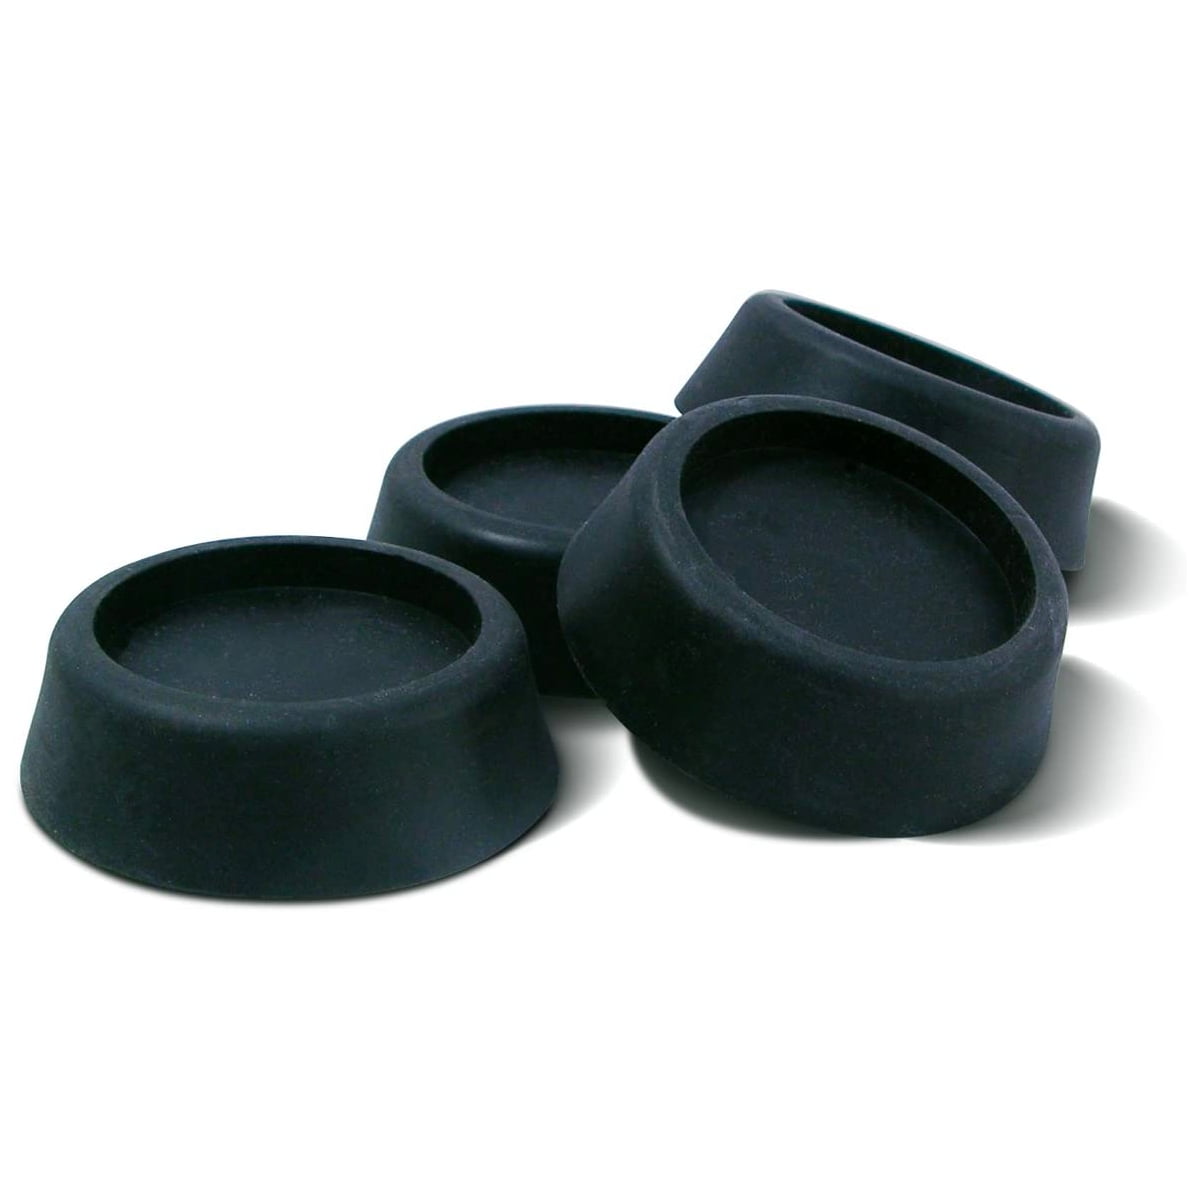 Details about   1PC Rubber Anti Vibration Pads Non Slip Grip Mute Feet Mat Cap for Washer Dryer 